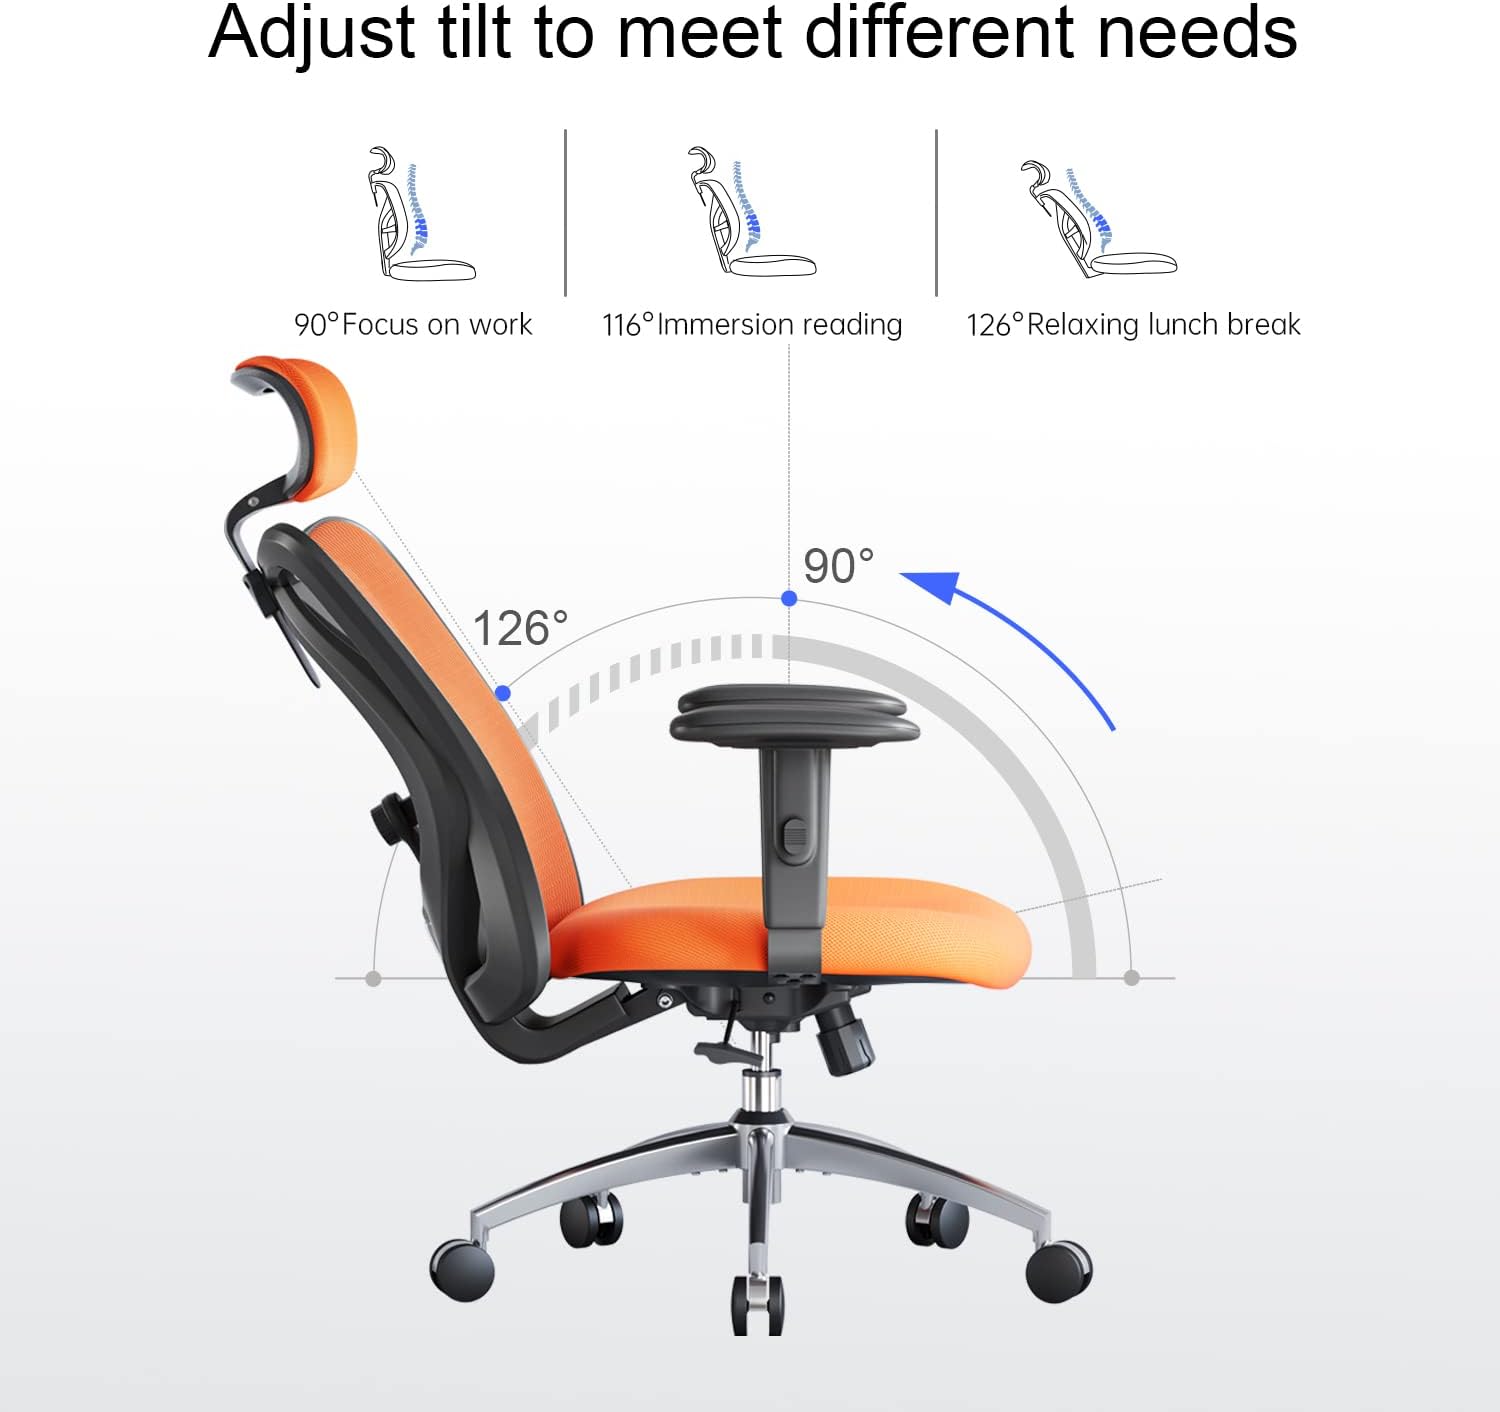 SIHOO M18 Ergonomic Office Chair for Big and Tall People